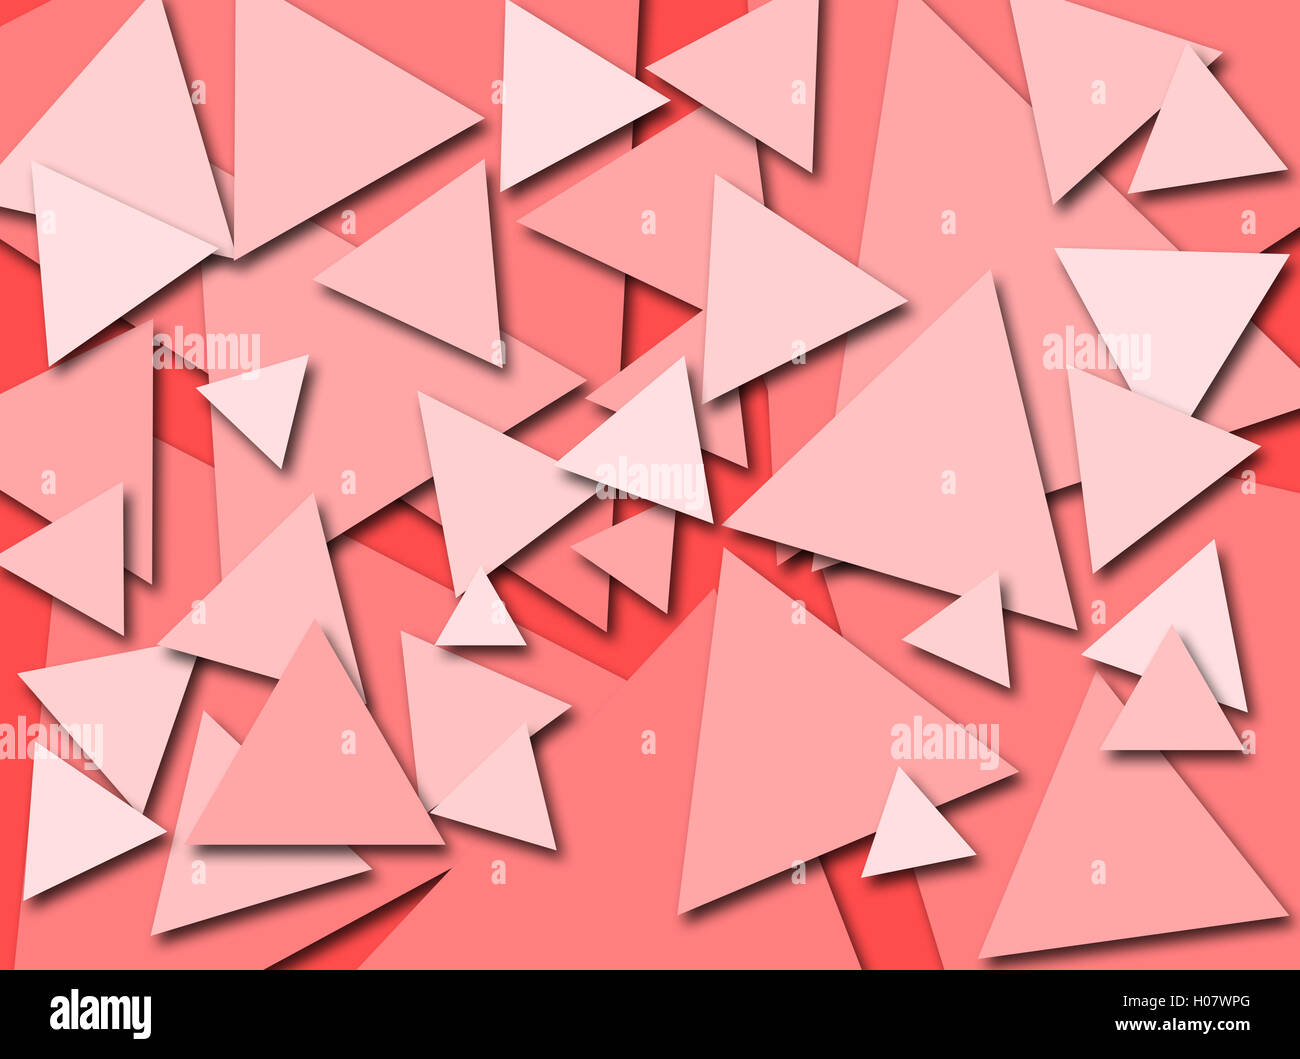 Triangle Tones Red Pink 3D Stock Photo